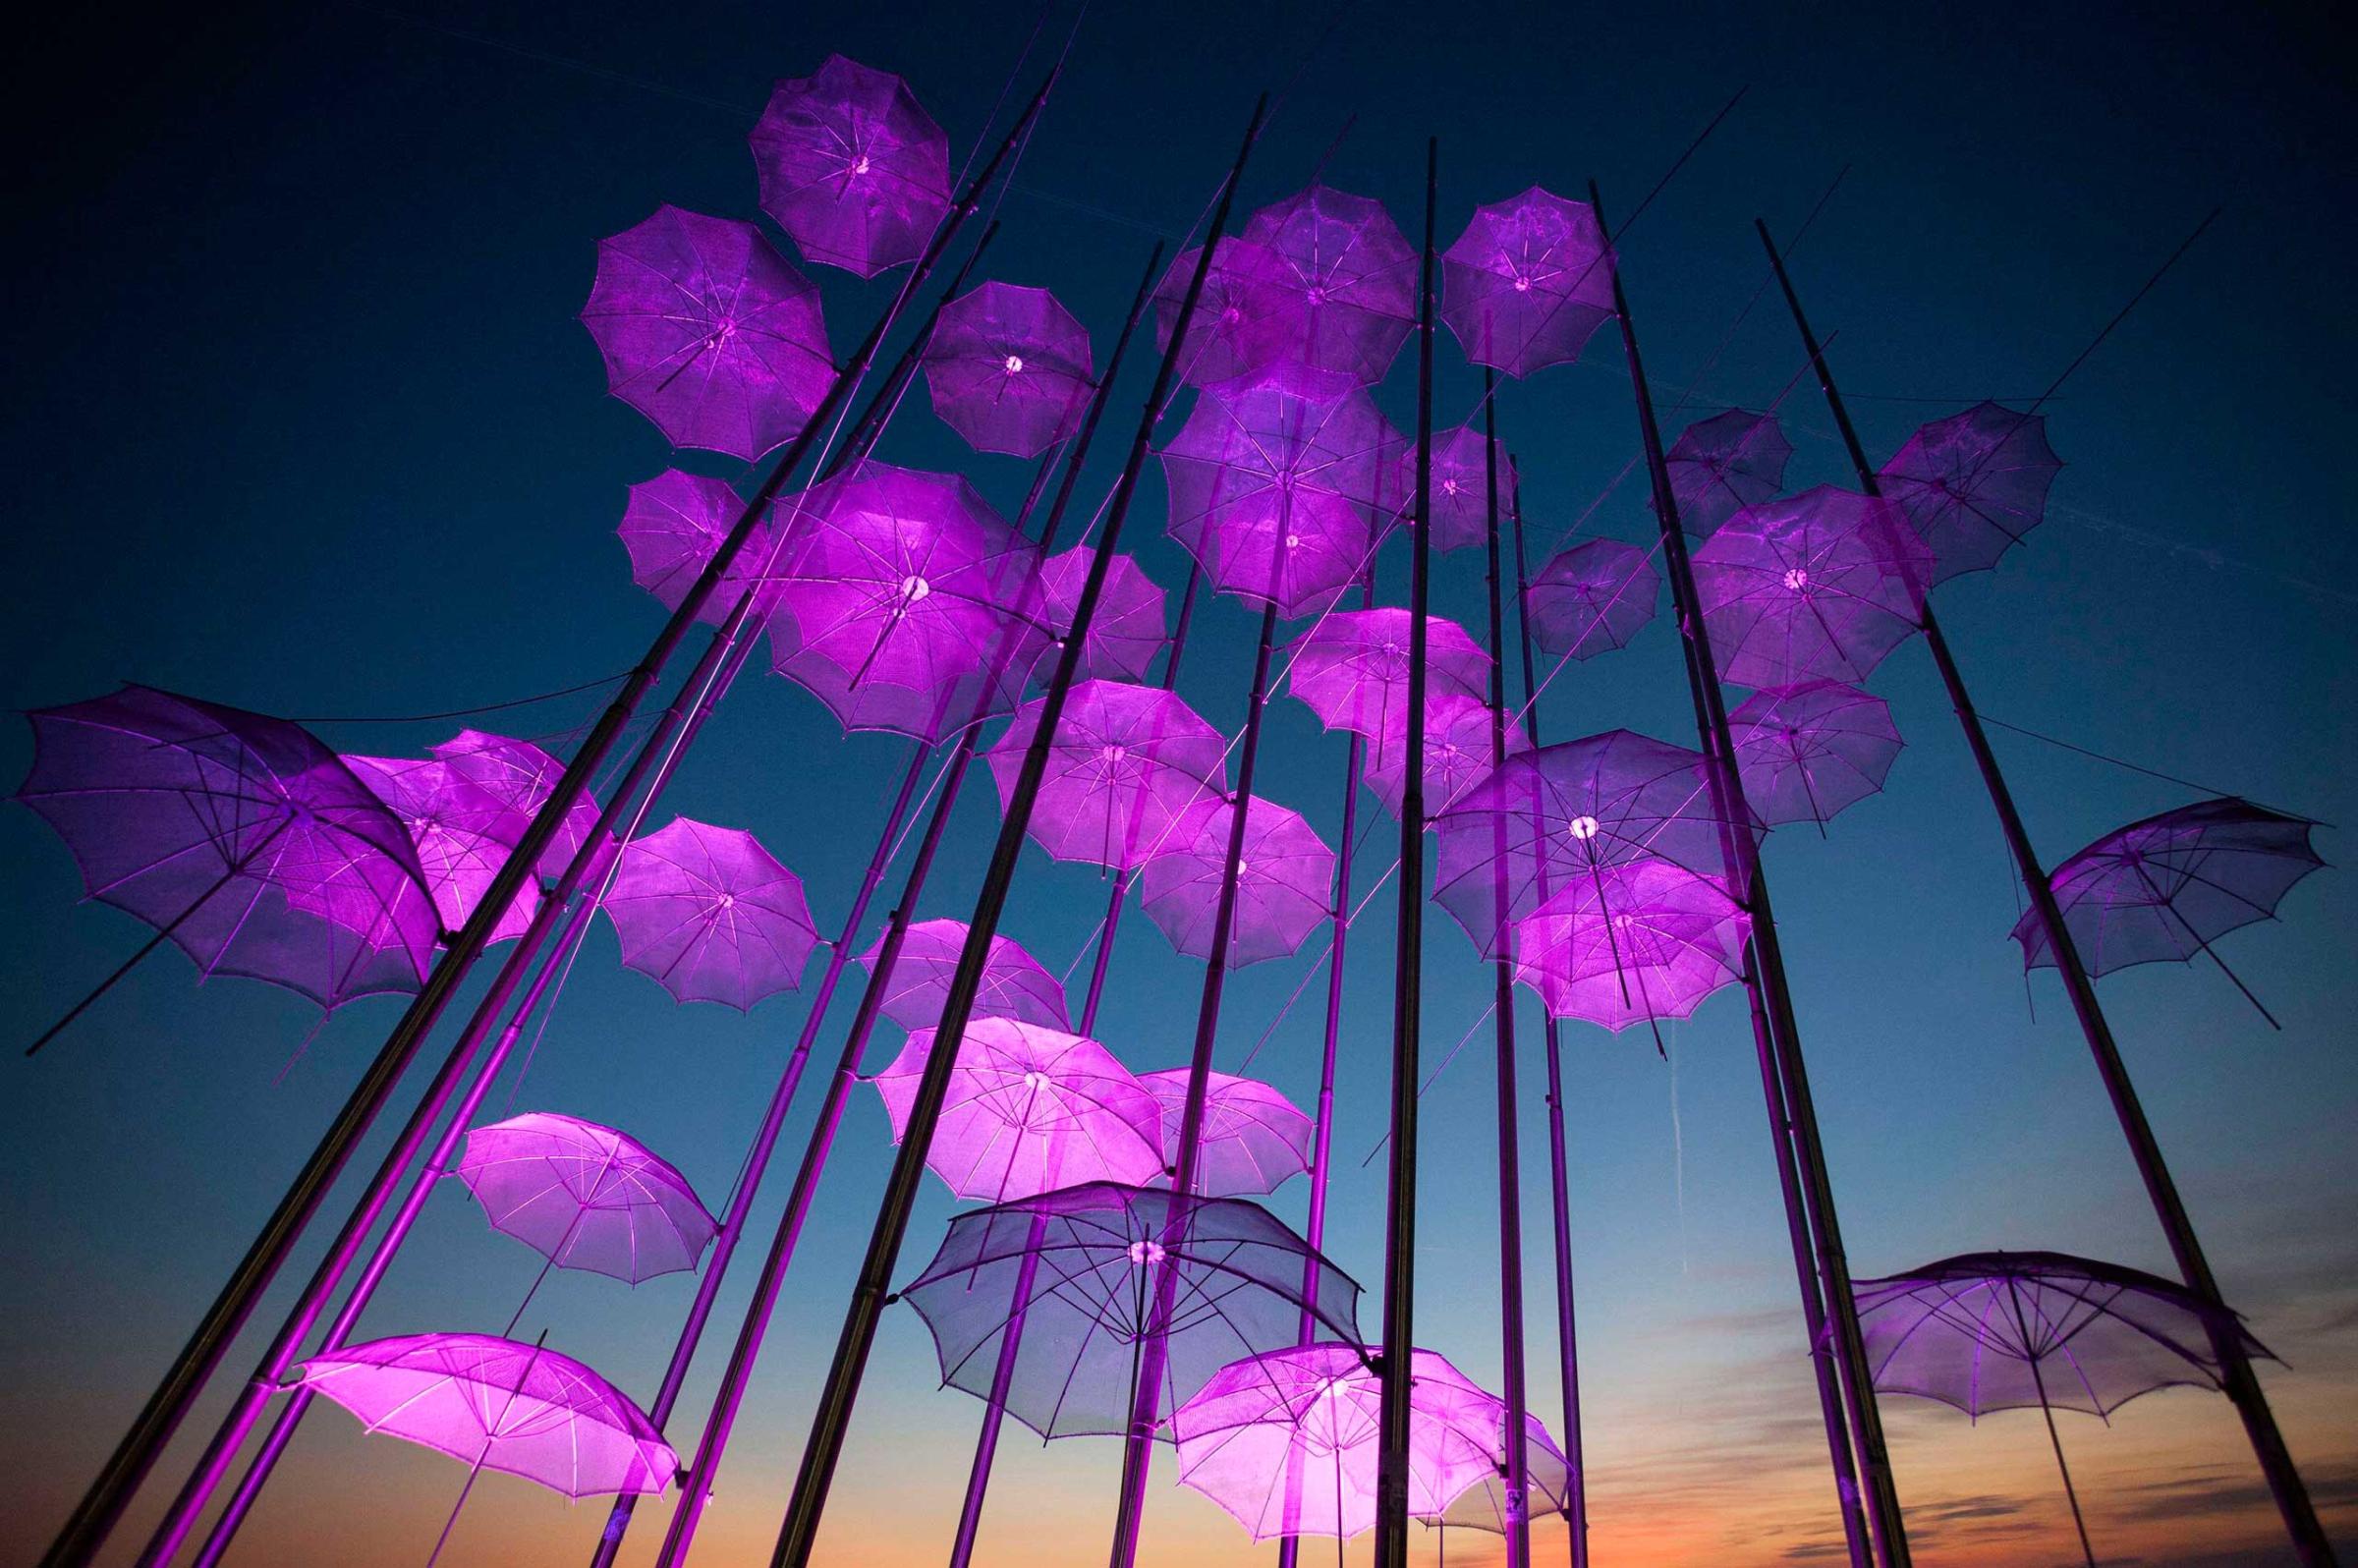 "Umbrellas", the sculpture by Giorgos Zogolopoulos is illuminated in pink light to mark Breast Cancer Awareness Month in Thessaloniki in northern Greece